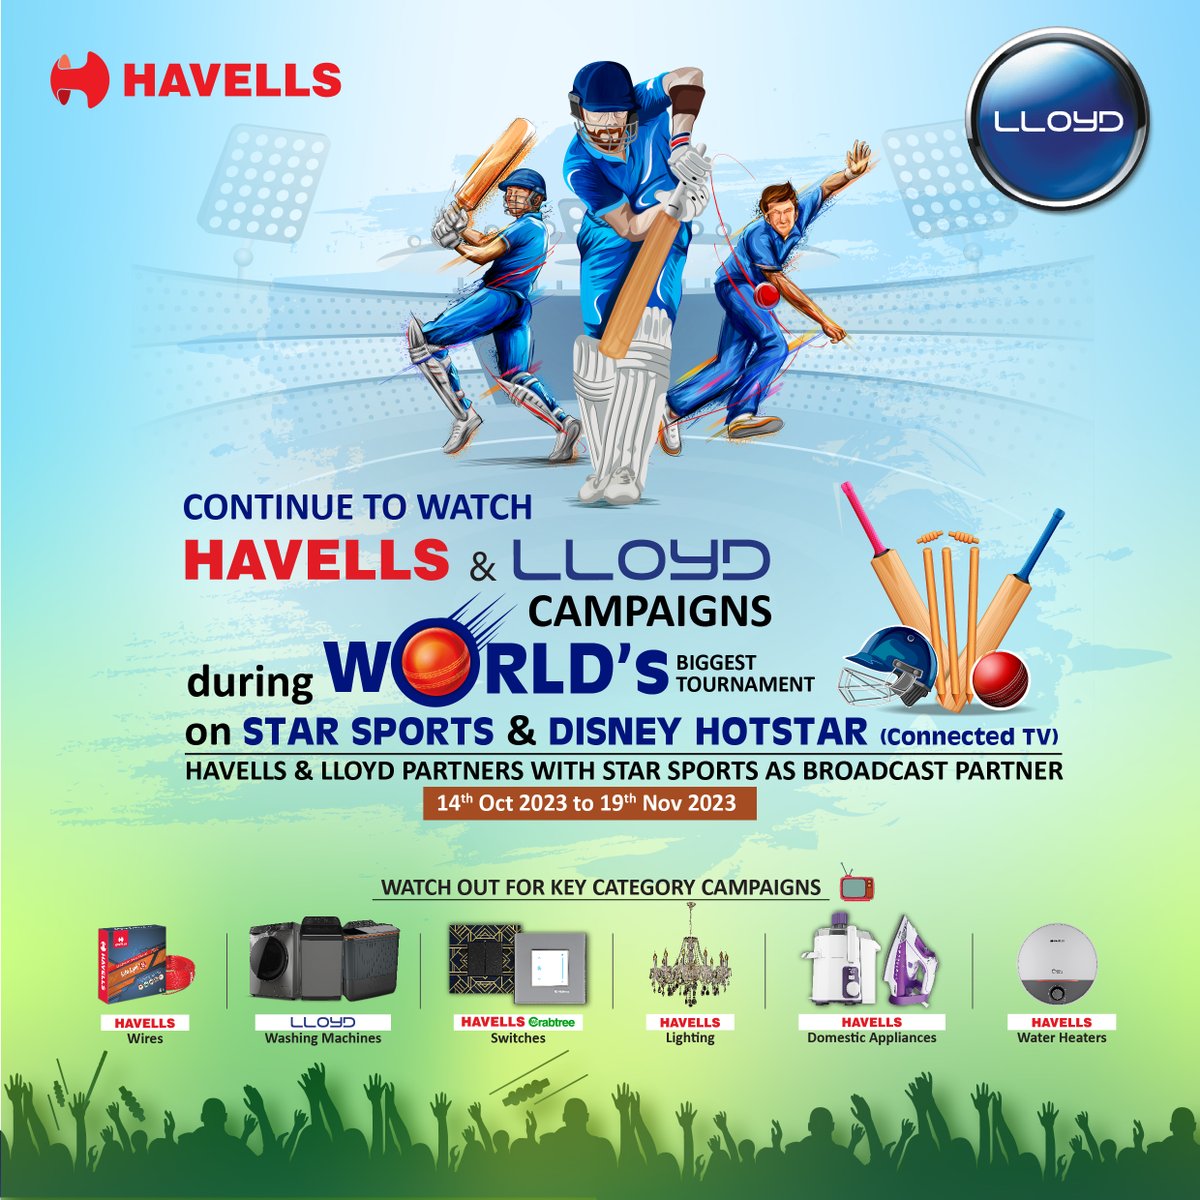 Look out for our new campaigns around Crabtree Switches, Lighting, Home Appliances, and Water Heaters during the ongoing Cricket World Cup on Star Sports channels and Disney Hotstar connected Tv! #Havells #Lloyd #CricketWorldCup #StarSports